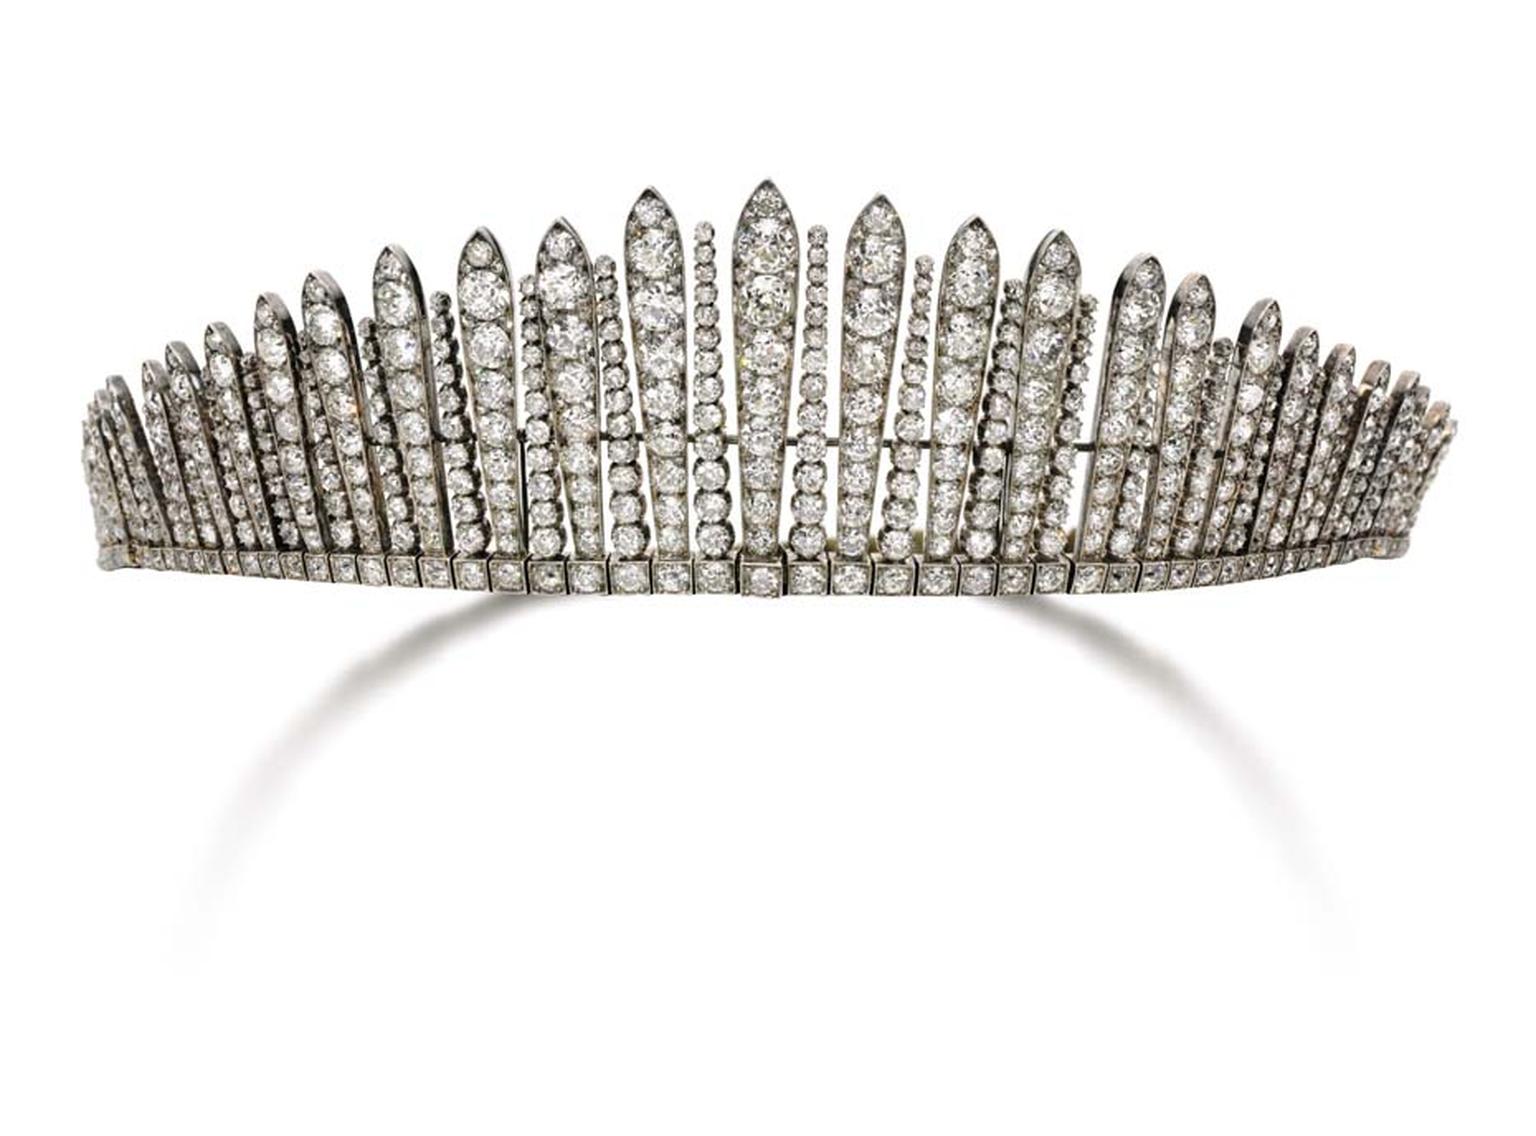 Dating back to the 1880s, this “tiara russe” diamond tiara, with a design based on the head ornaments worn by the Russian kokoshniks, will be auctioned at Sotheby’s Geneva this May (estimate: $150-295,000).